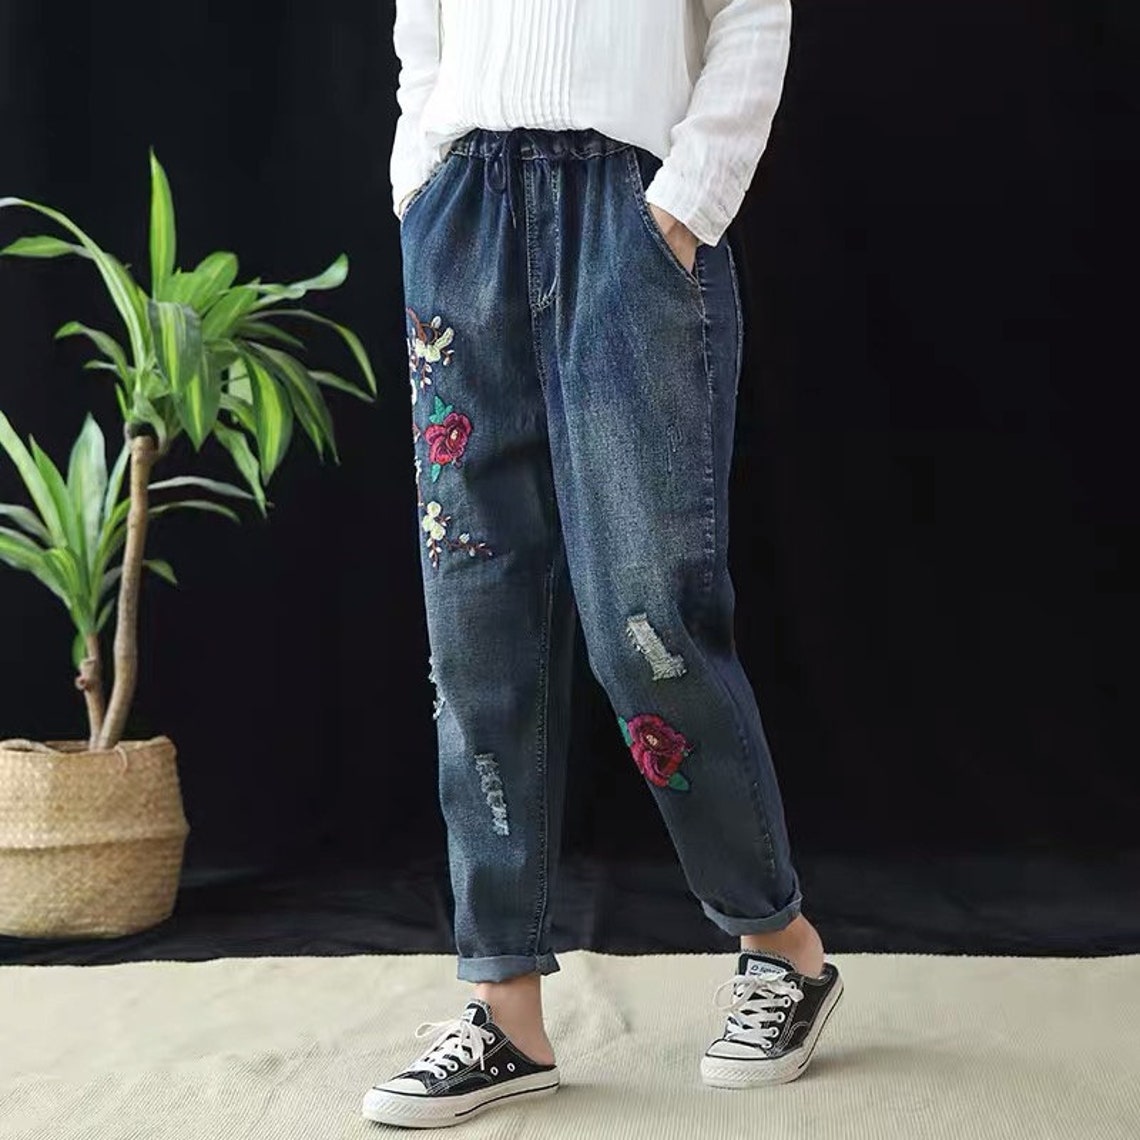 Women Embroidered Floral Denim Jeans Pants Cute Cat | Etsy